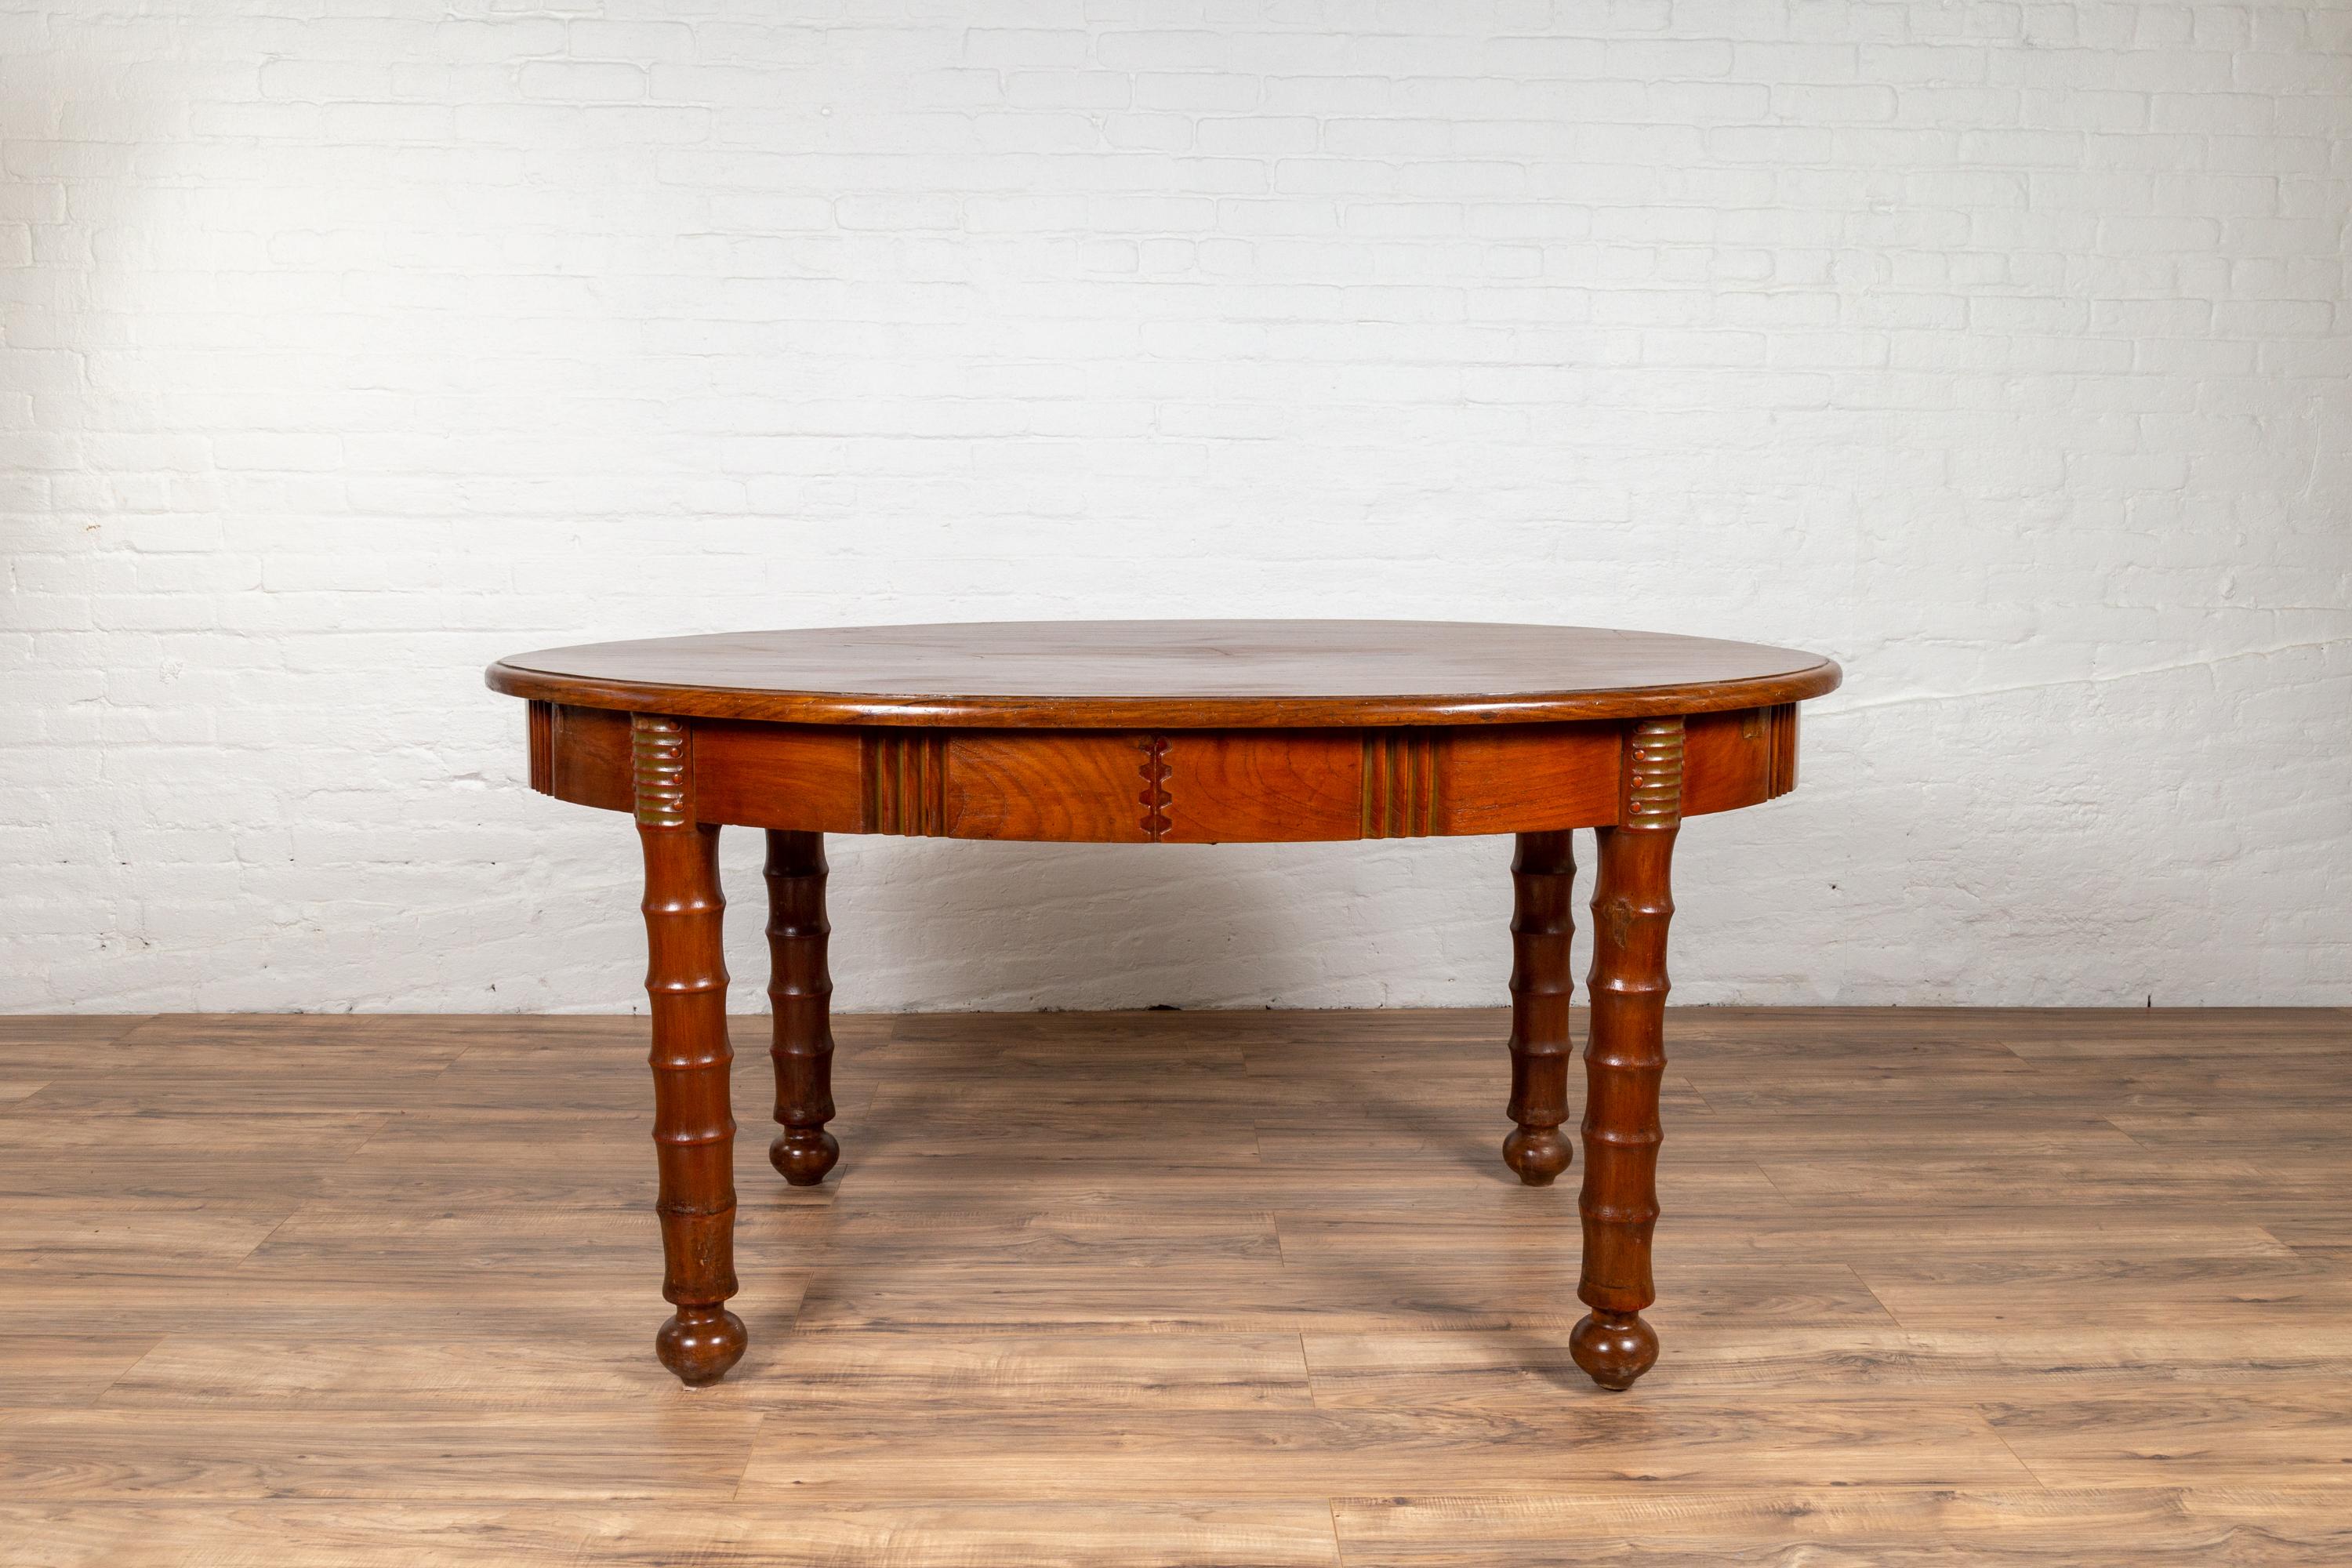 Antique Oval Dining Room Table from Indonesia with Spindle Legs and Warm Patina In Good Condition For Sale In Yonkers, NY